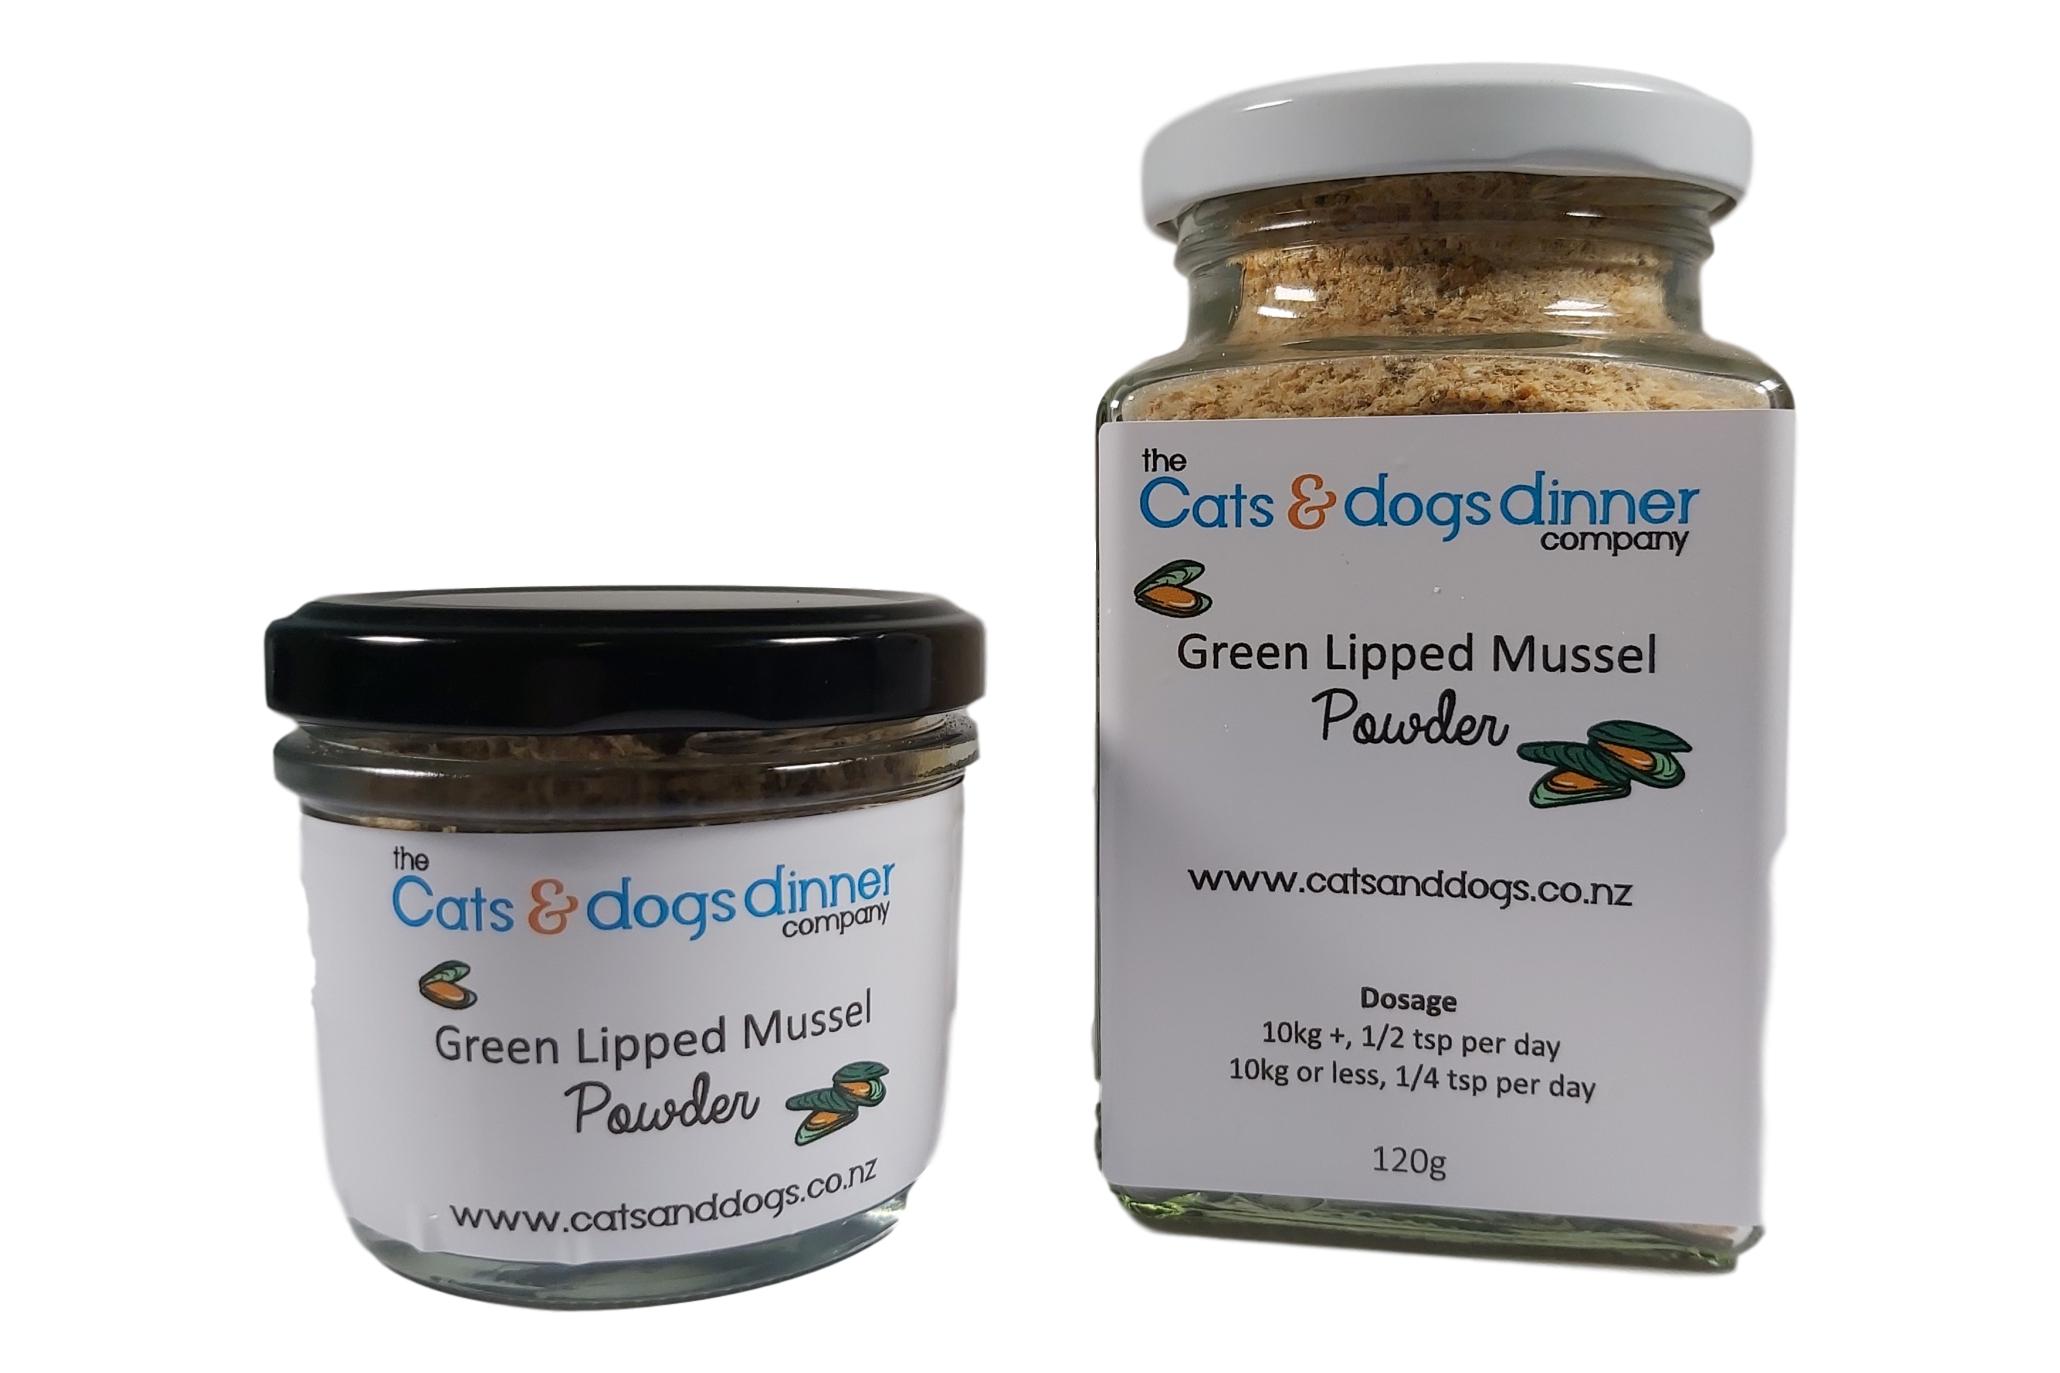 Green Lipped Mussel Powder For Cats & Dogs The Cats & Dogs Dinner Company